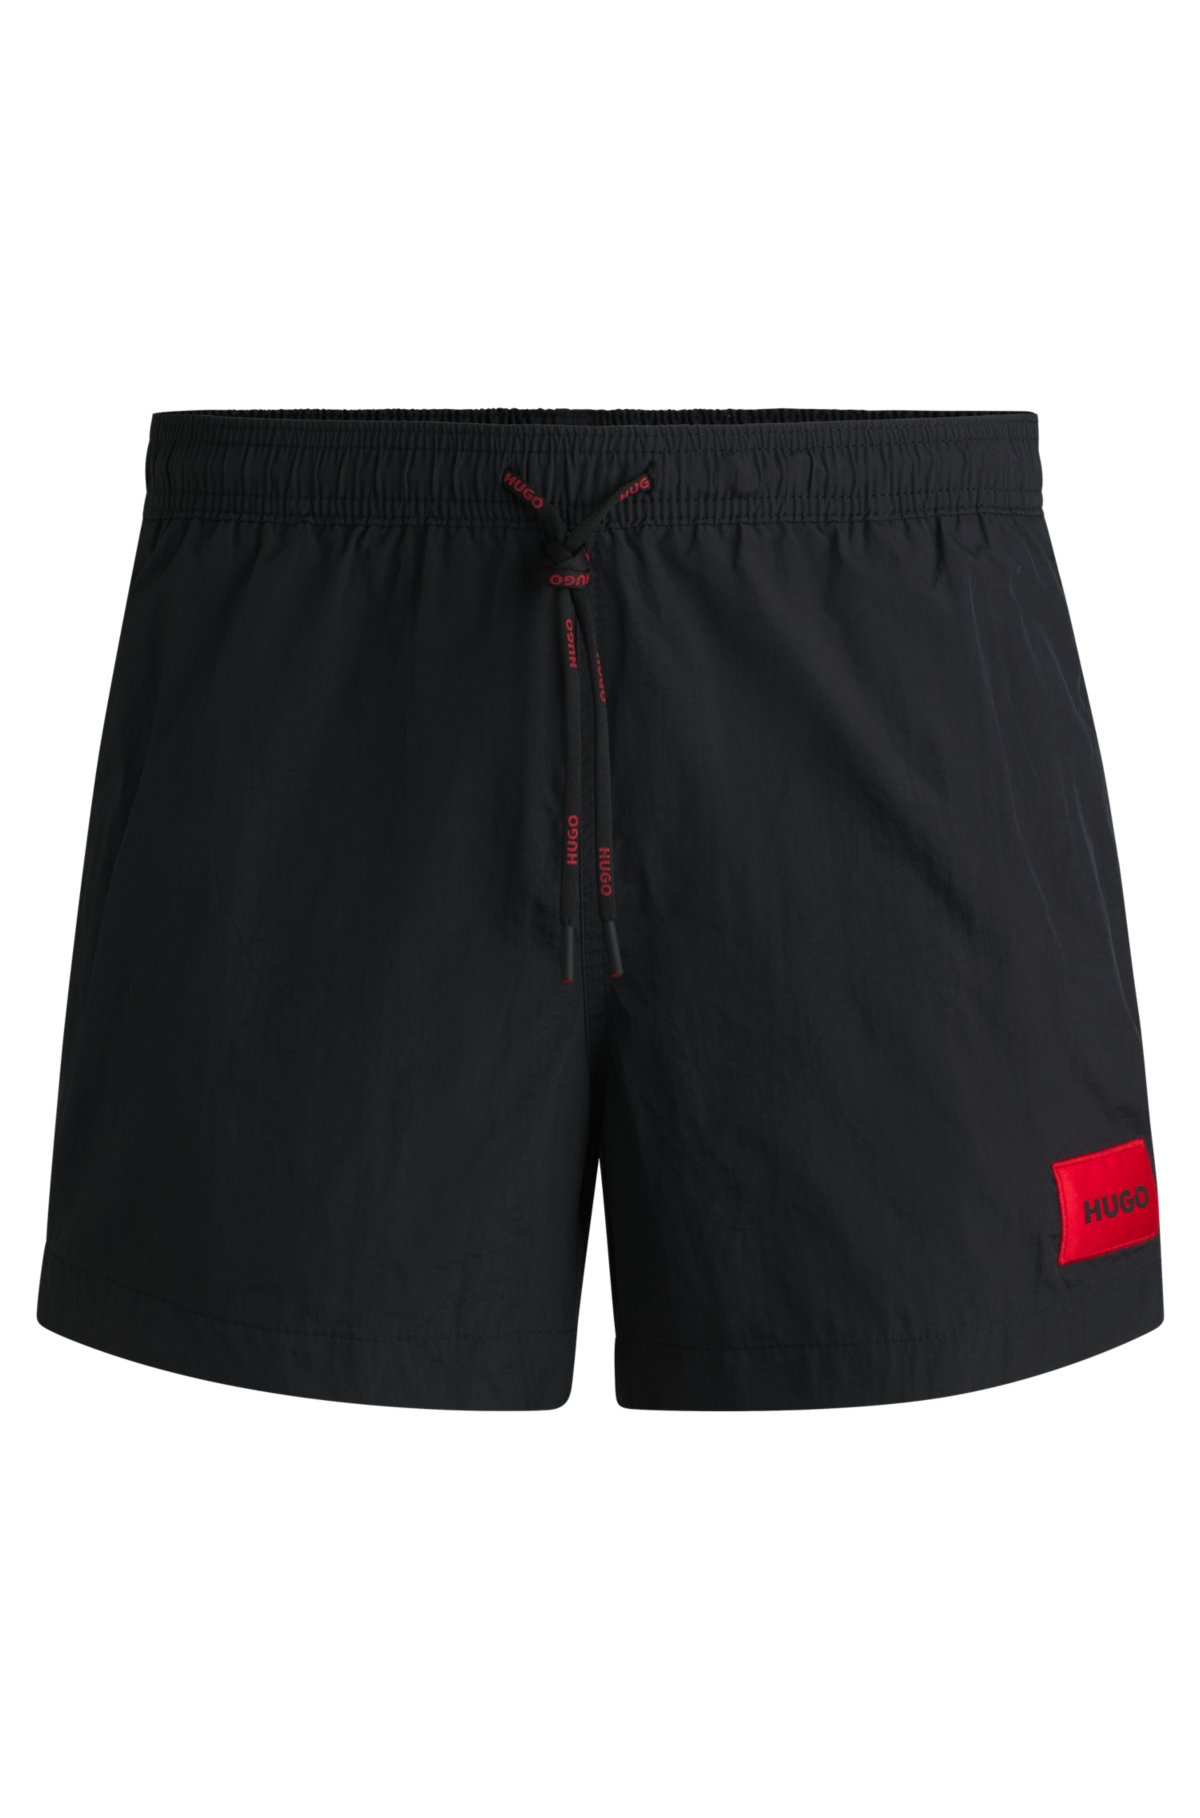 HUGO - Quick-drying swim shorts in recycled material with logo